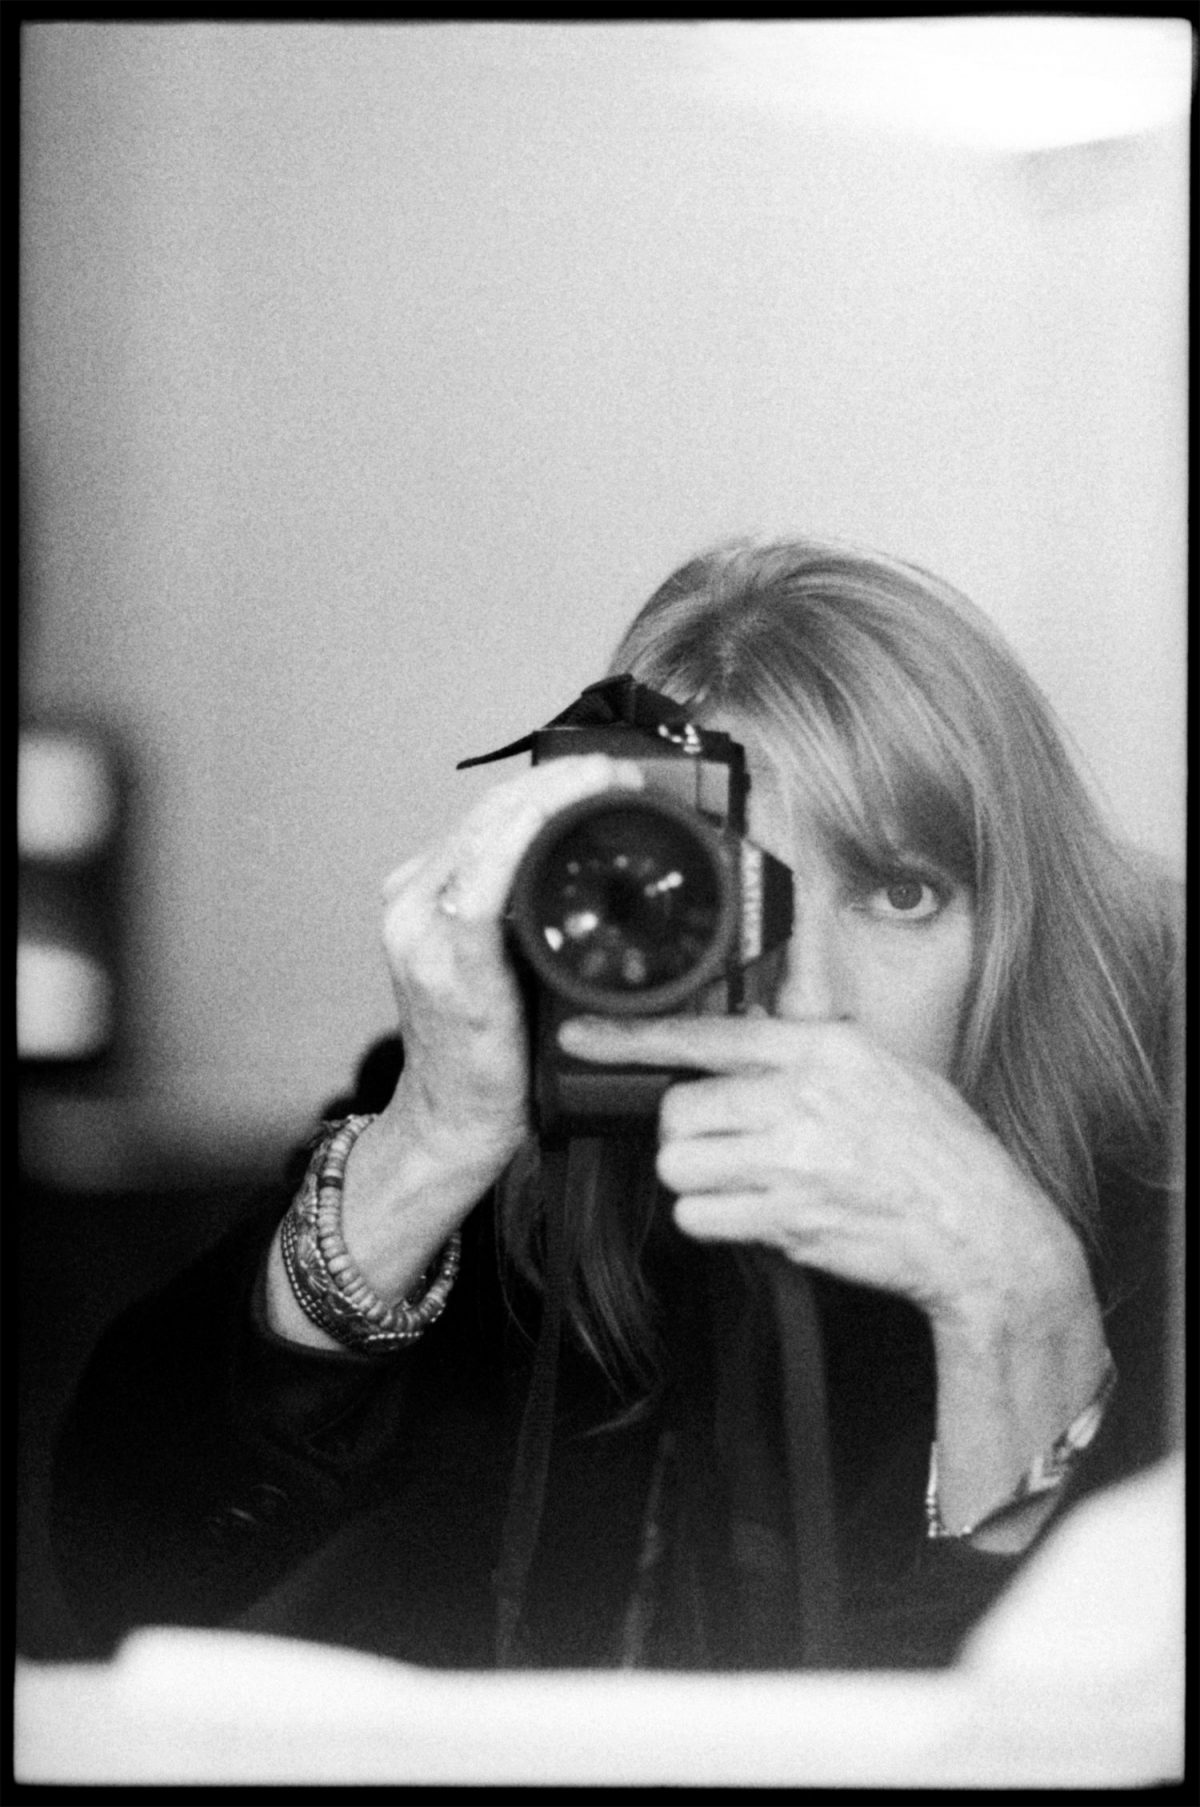 Linda McCartney, and her Photographs of Paul, The Beatles and Other Artists  image pic